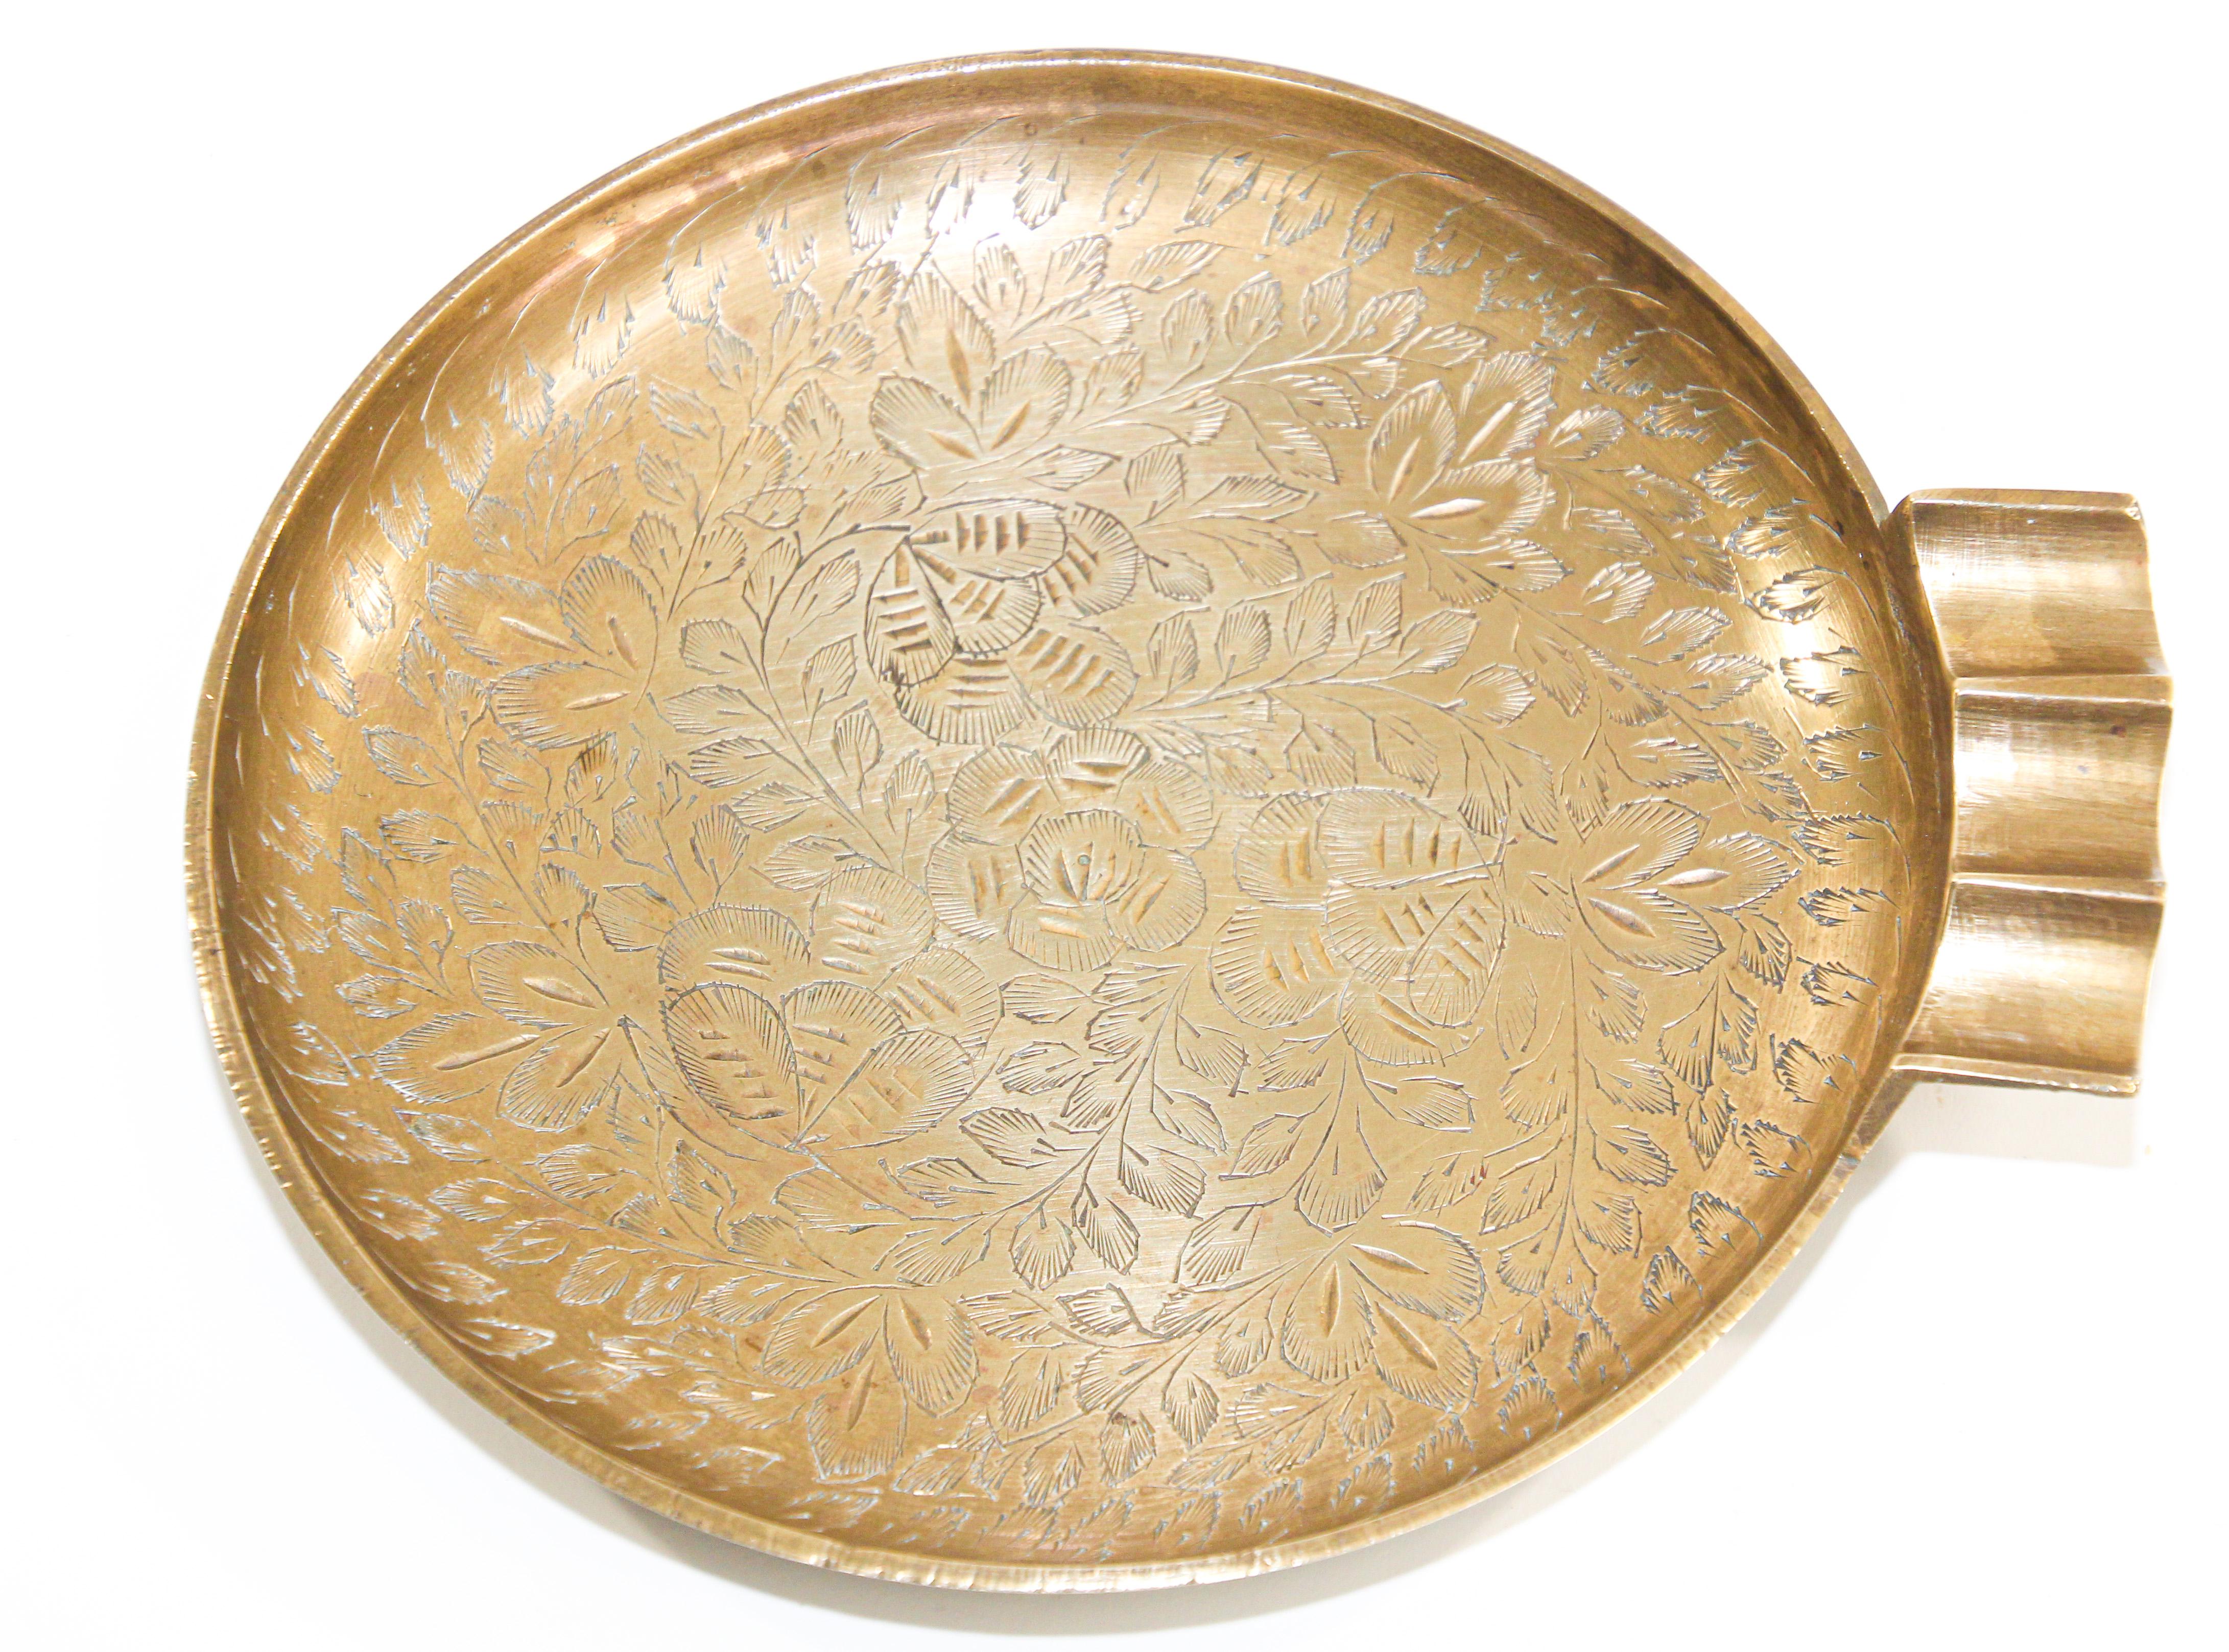 Vintage round etched polished brass ashtray.
Large Anglo-Indian style hand-crafted brass tray, nicely etched with floral Moorish designs.
Brass ashtray :Measures: 7